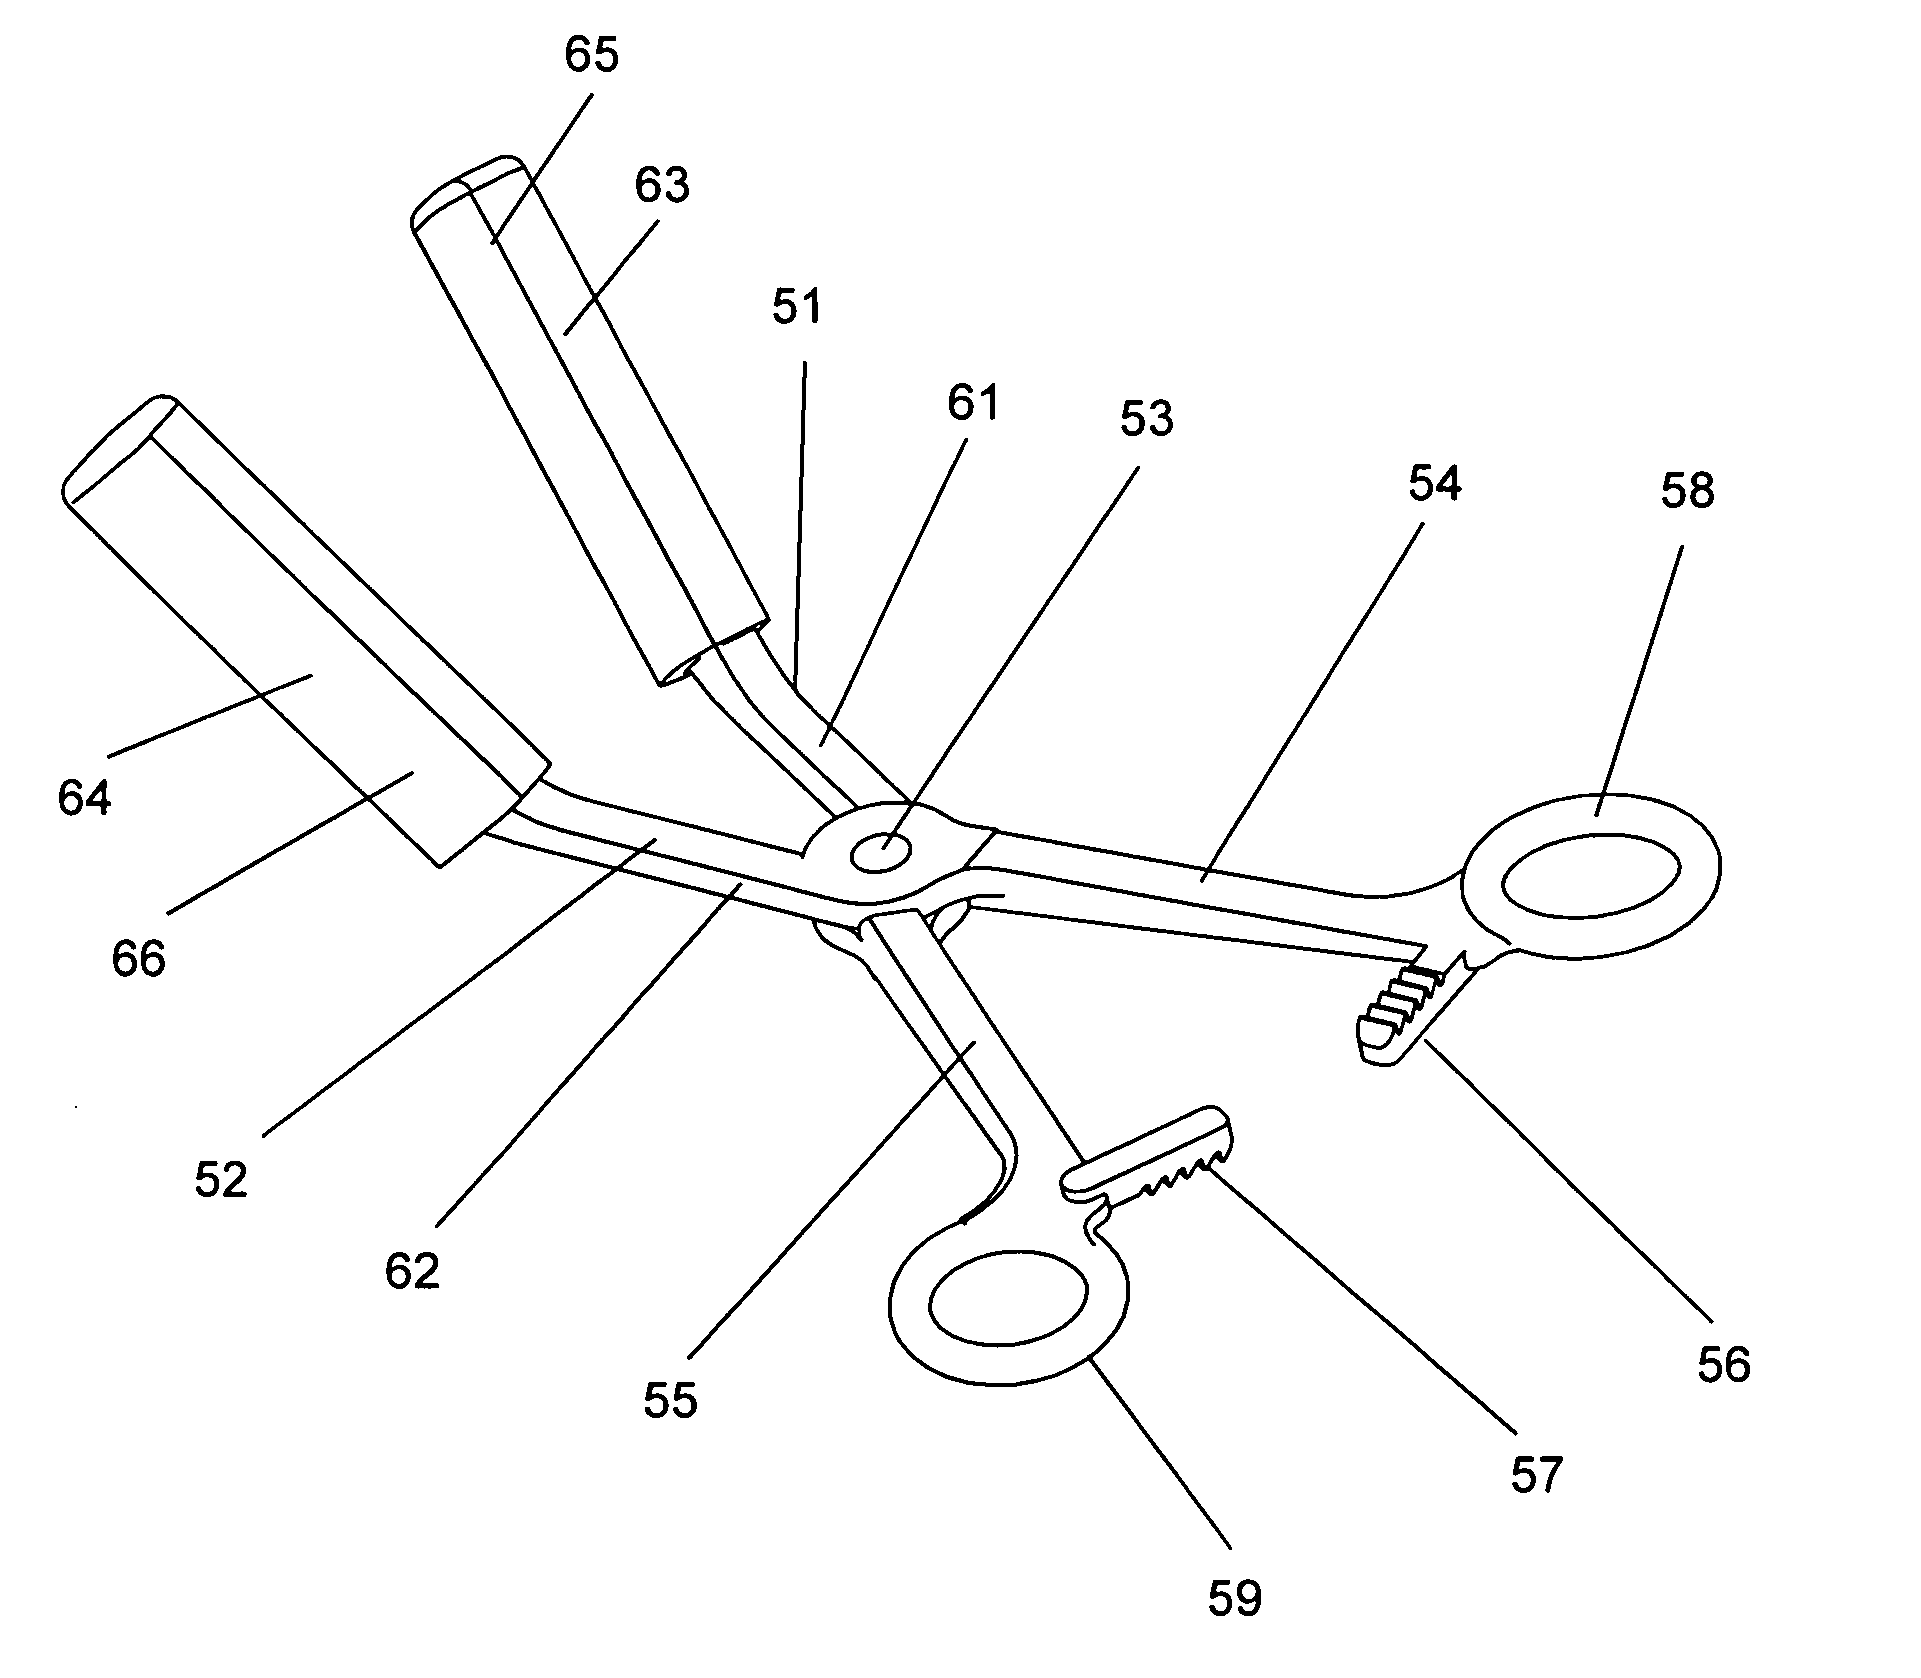 Method and instrument for occlusion of uterine blood vessels